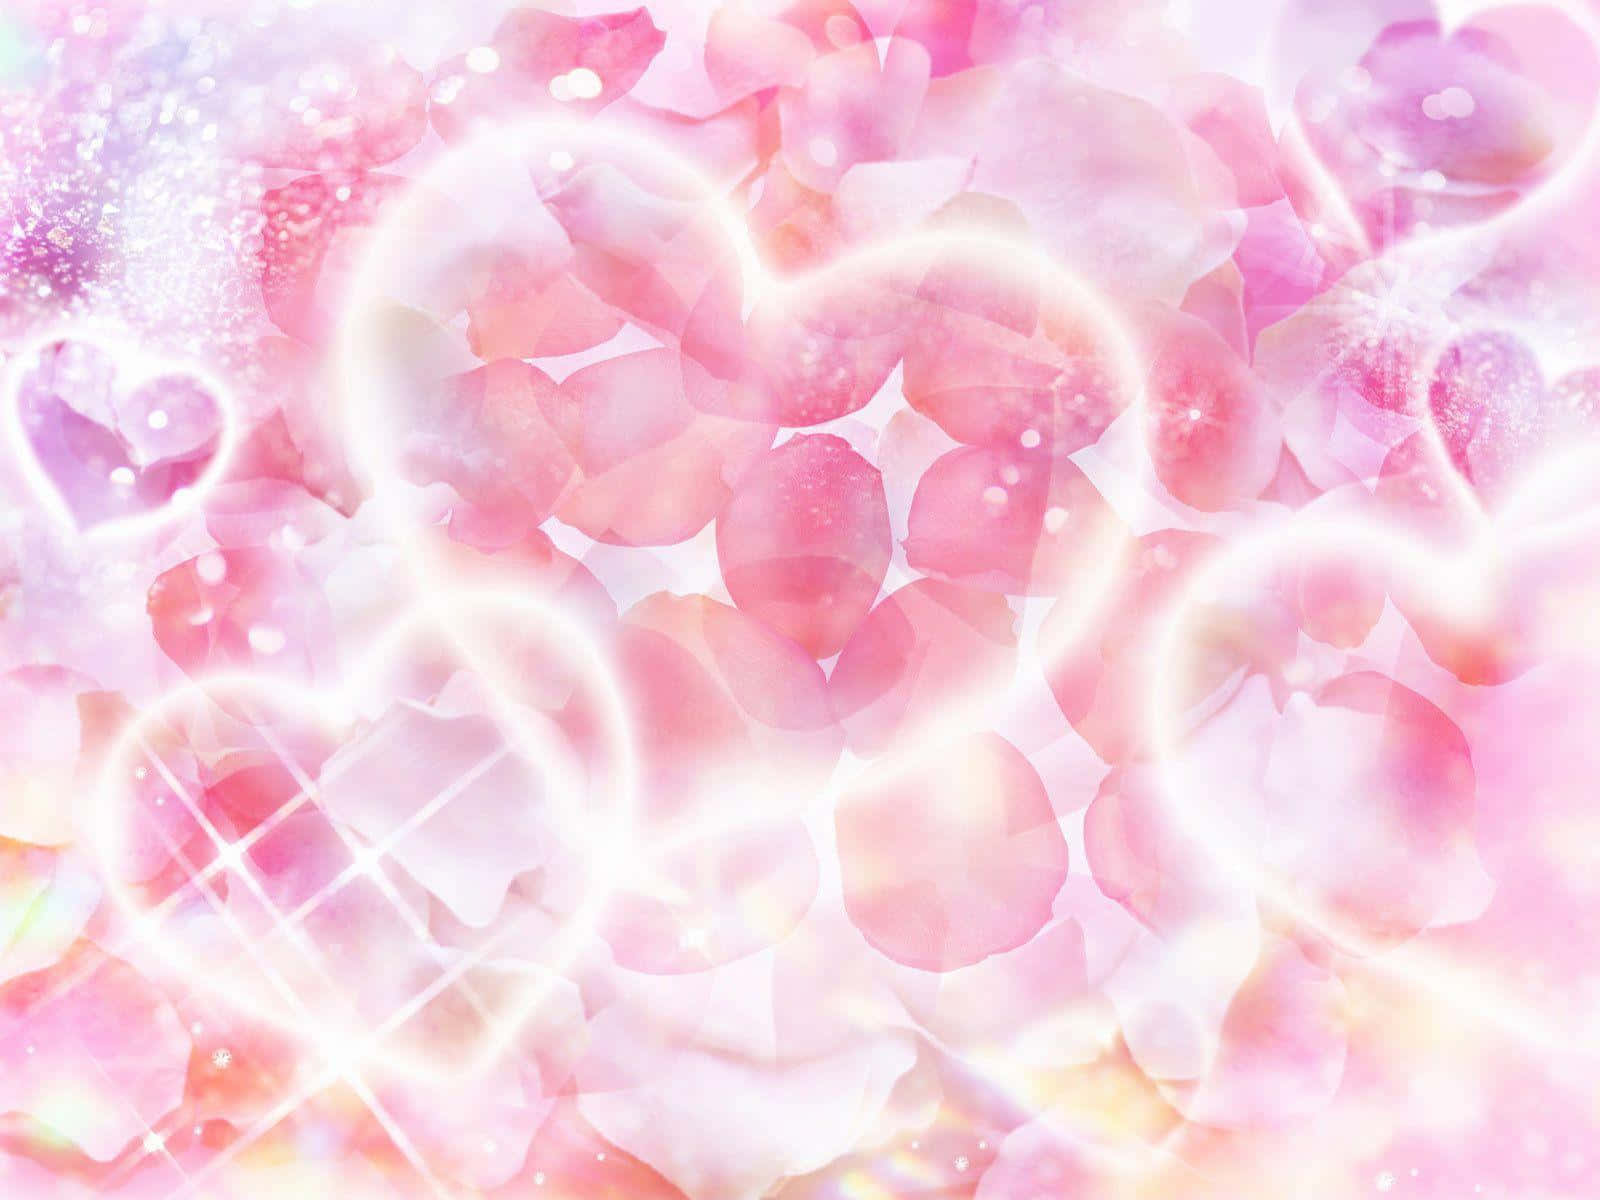 Enraptured by Pink Love Wallpaper